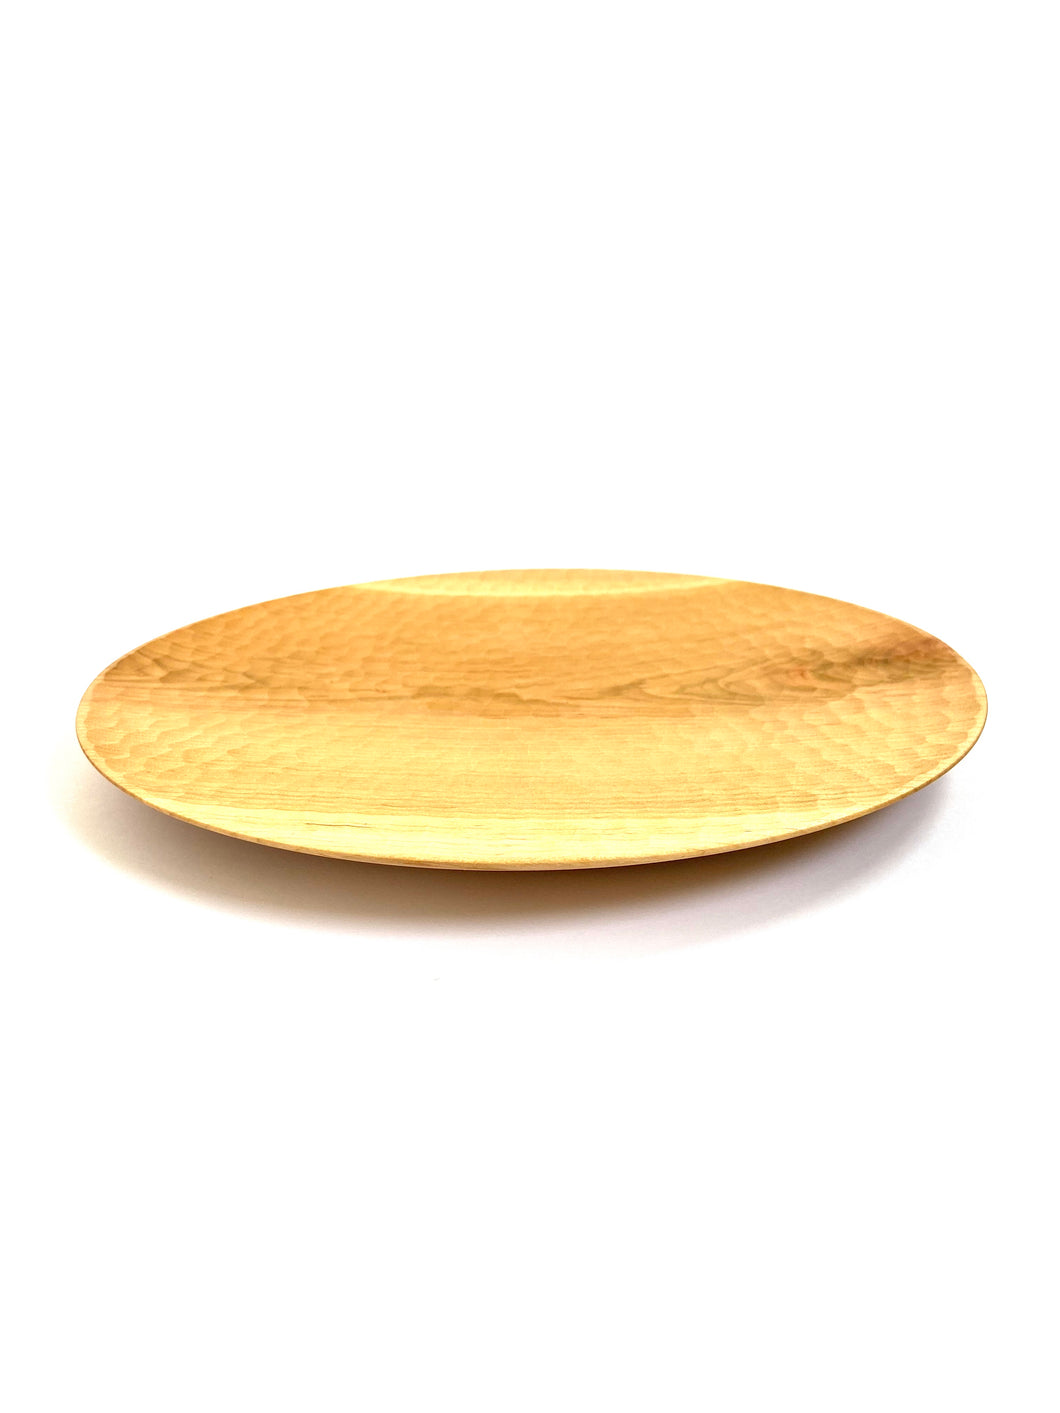 Japanese Handcrafted Hand curved Wooden Plate Cherry